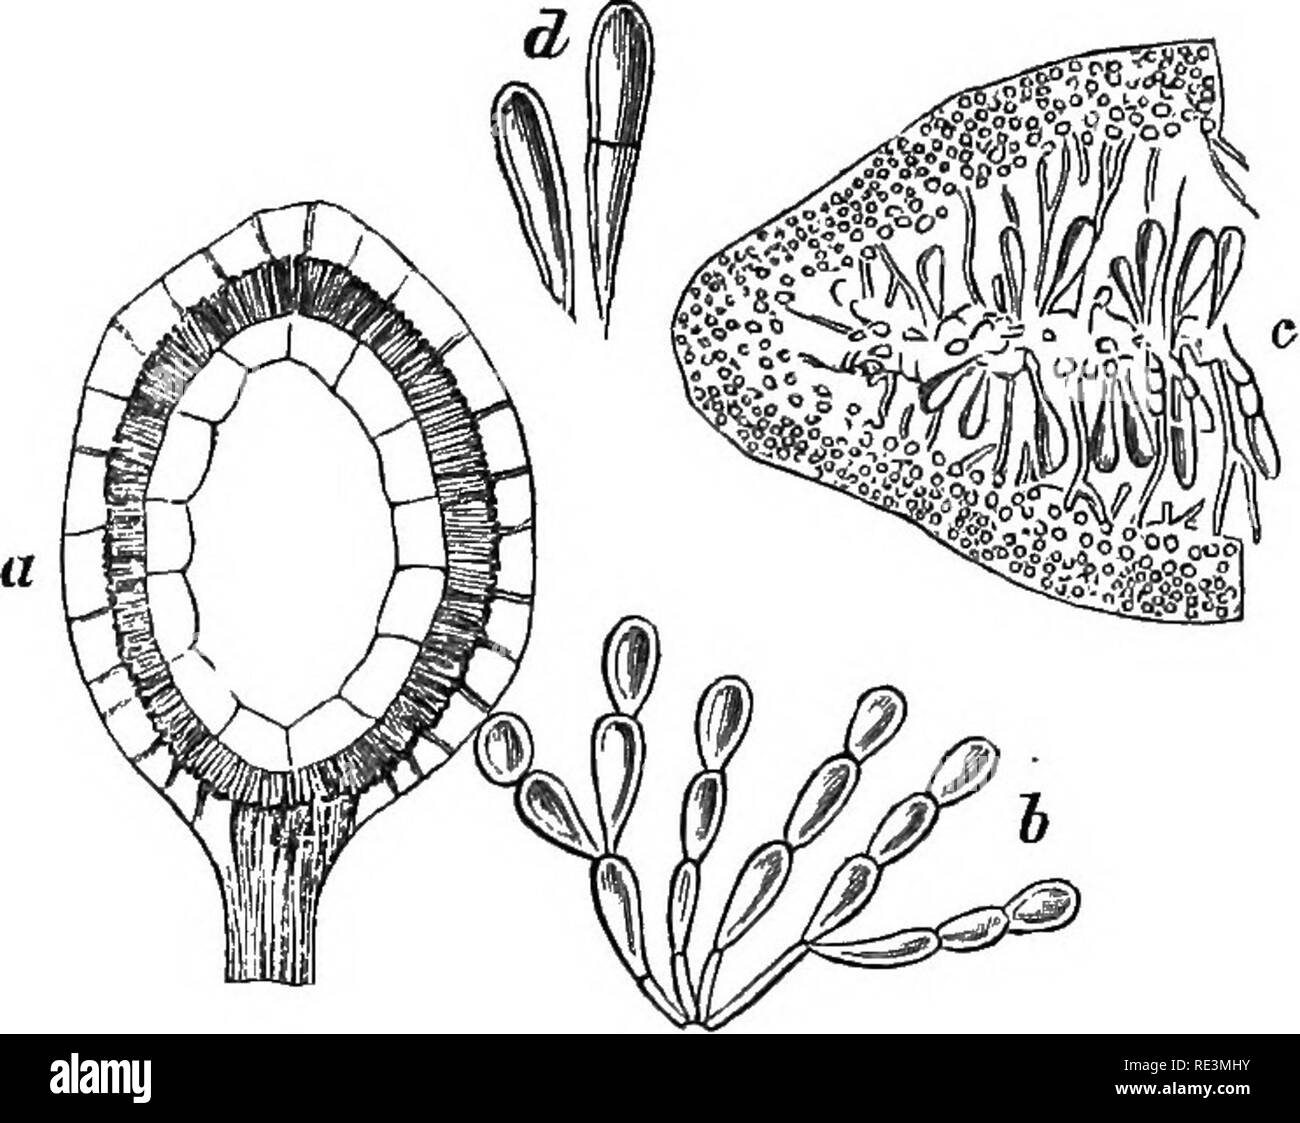 . Introduction to cryptogamic botany. Cryptogams. INTRODUCTION TO CEYPTOGAMIO BOTANY. 193 placenta of Eucheuma is free, except at the very base, and is suspended in the middle of the nucleus by delicate filaments proceeding from it to the walls of the nucleus, while in Solieria (Fig. 44, e) it is perfectly free, with the exception of similar connecting threads. It is a curious matter that there should. Fig. 47. a. Nucleus of Eucheuma isiforme, J. Ag., showing the placenta at- tached to the wall of the nucleus by delicate threads, and supported at the base, magnified. h, Moniliform threads, bea Stock Photo